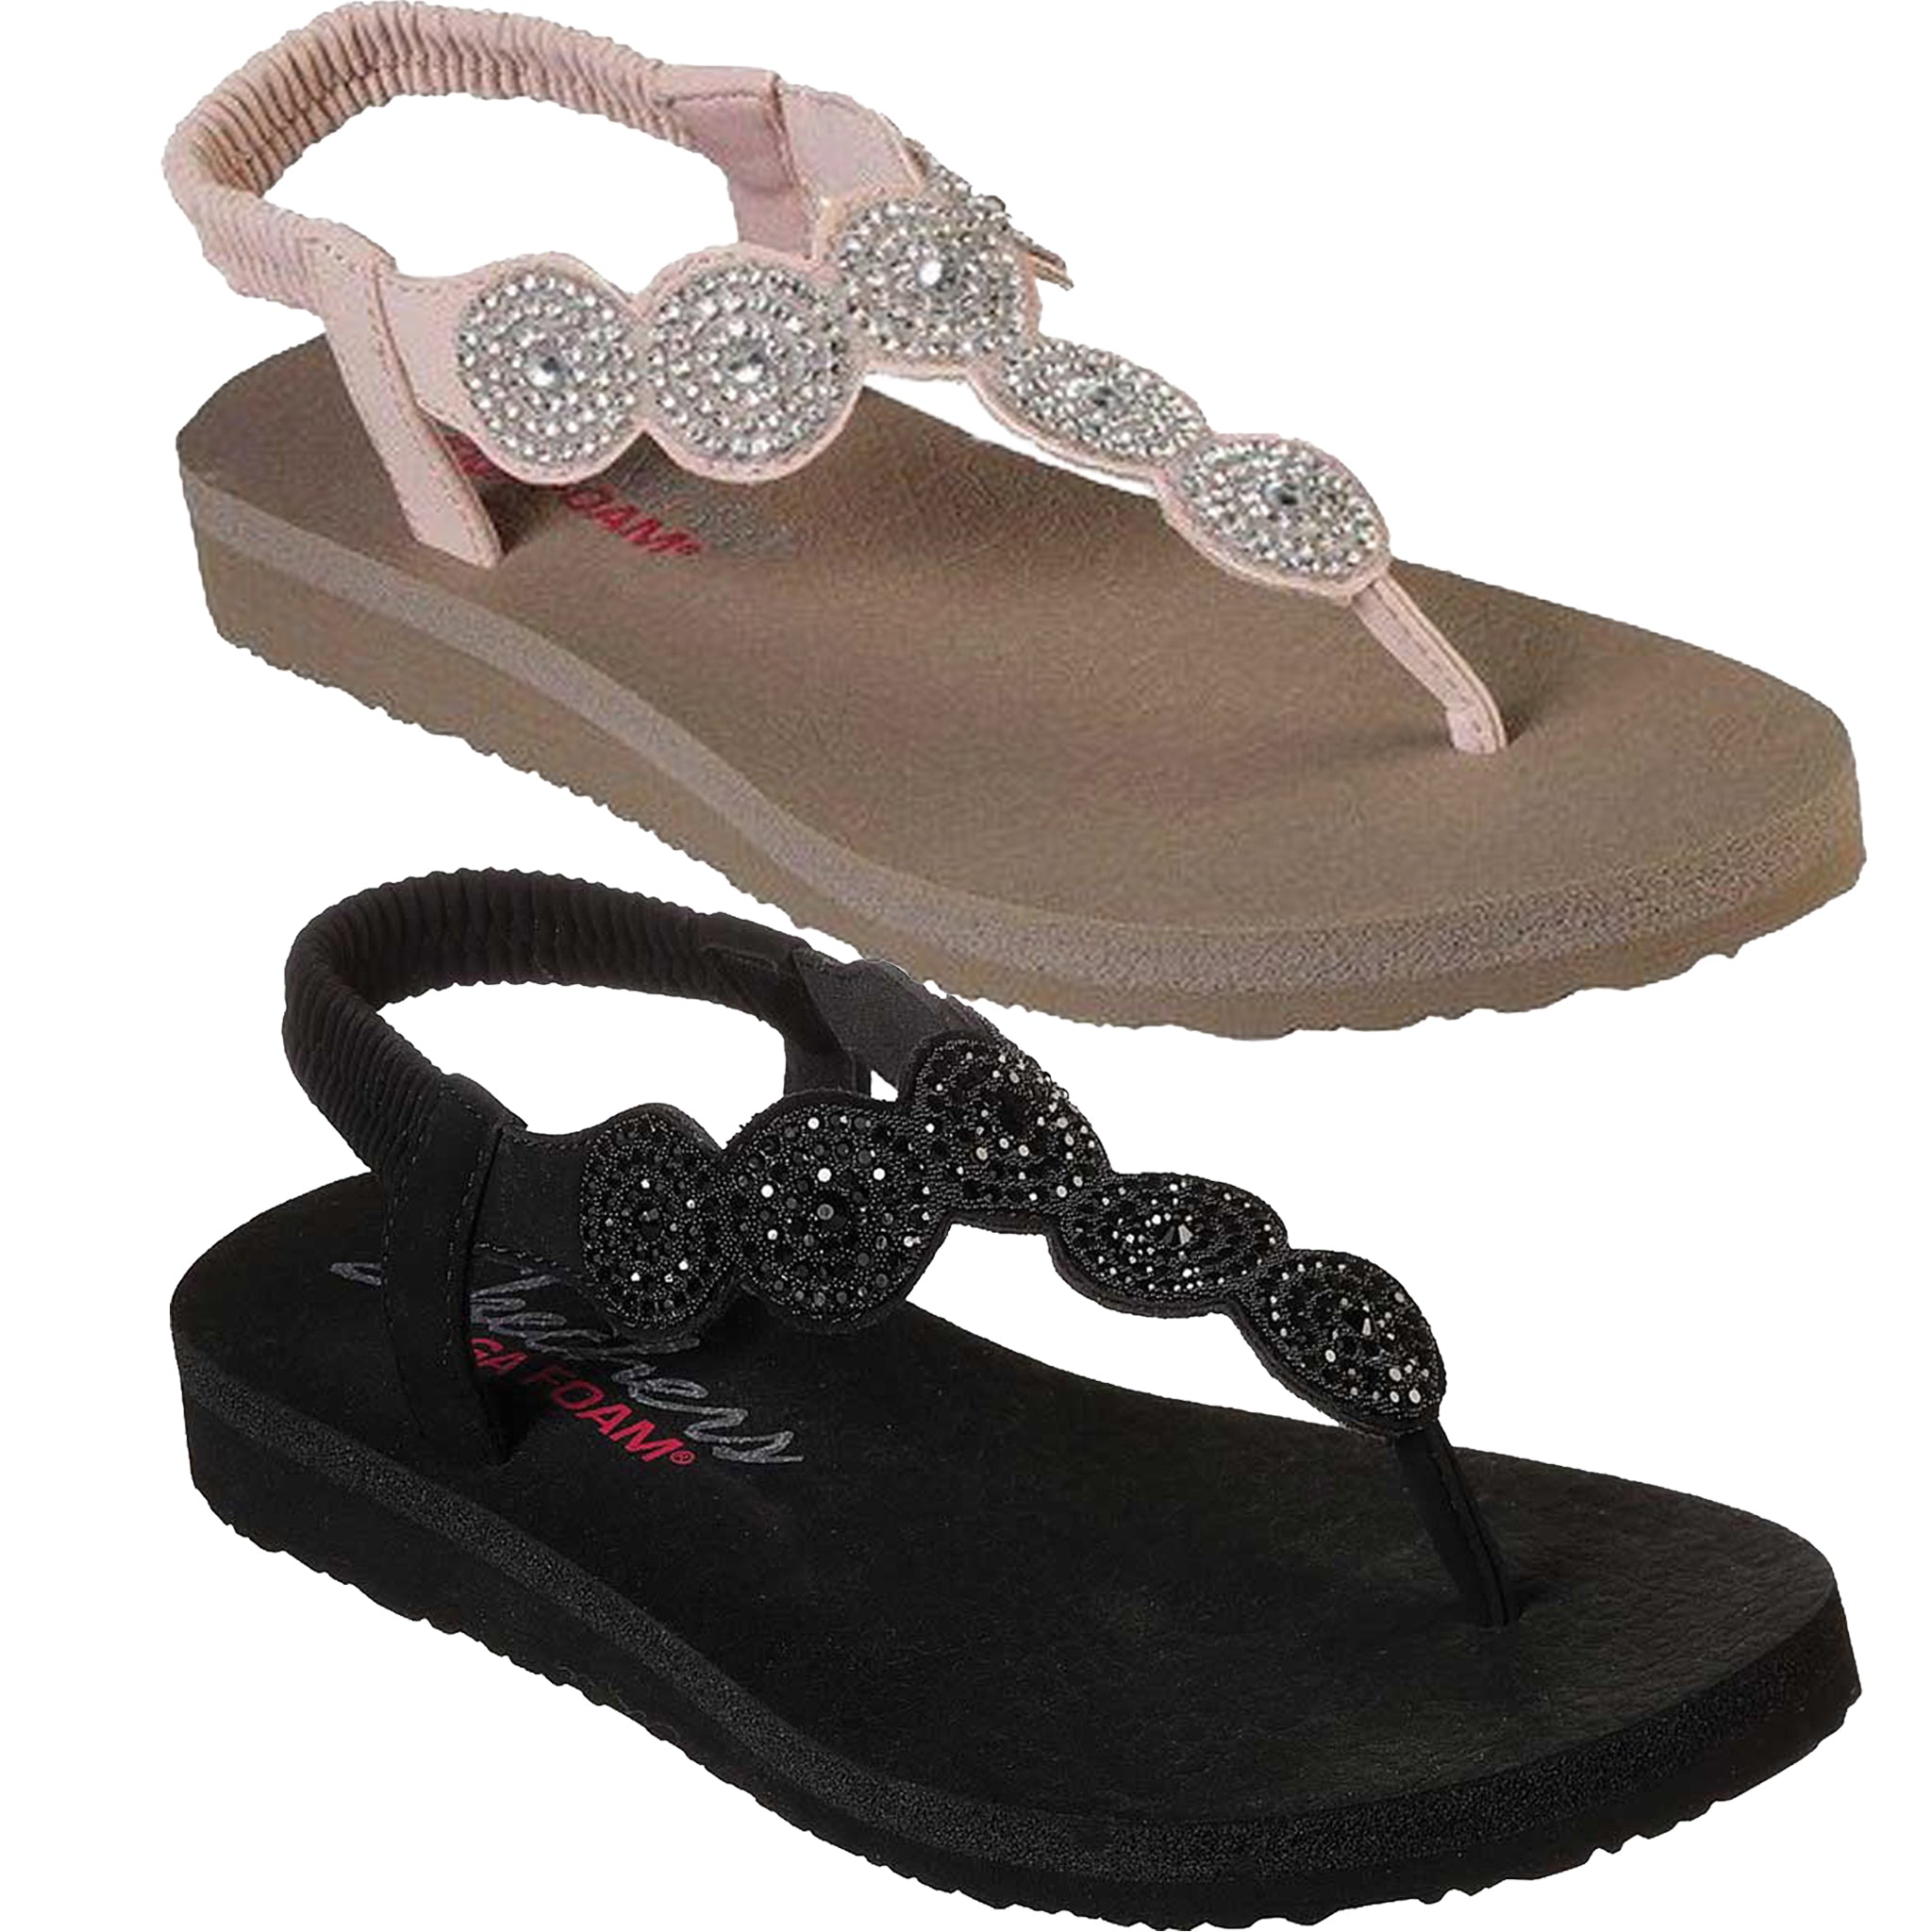 Skechers Women's 31755 Meditation Sparkle Yoga Foam Thong – That Shoe Store and